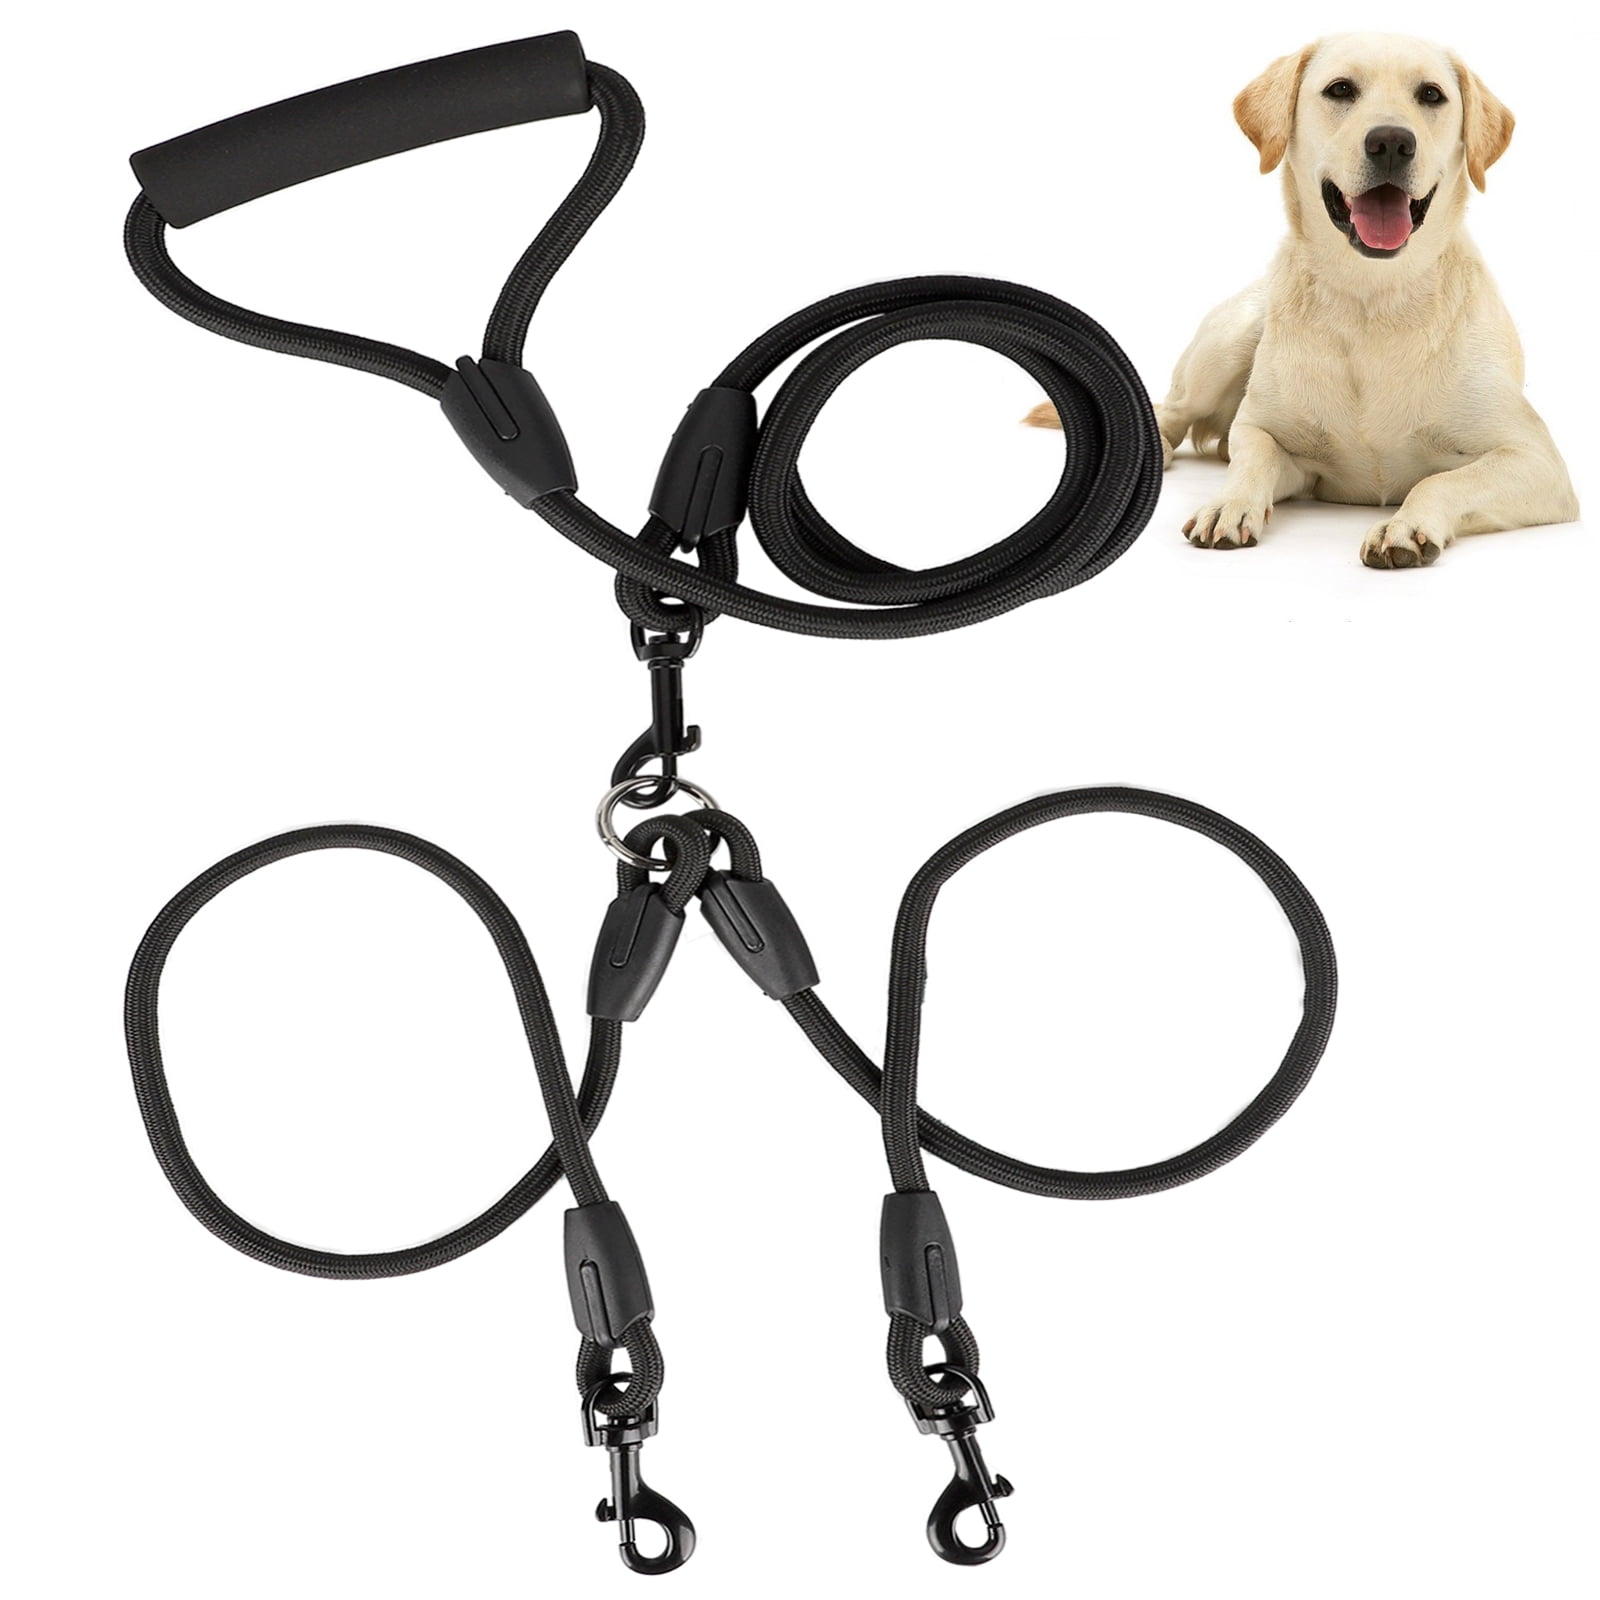 Heavy Duty Dual Dog Leash /Triple Dog Leash,360°Swivel No Tangle Double Dog Walking Training Leash,2-way&3-way interchangeable Lead with Hand-protected Handle Waste Bag Dispenser for Two/Three Dogs 